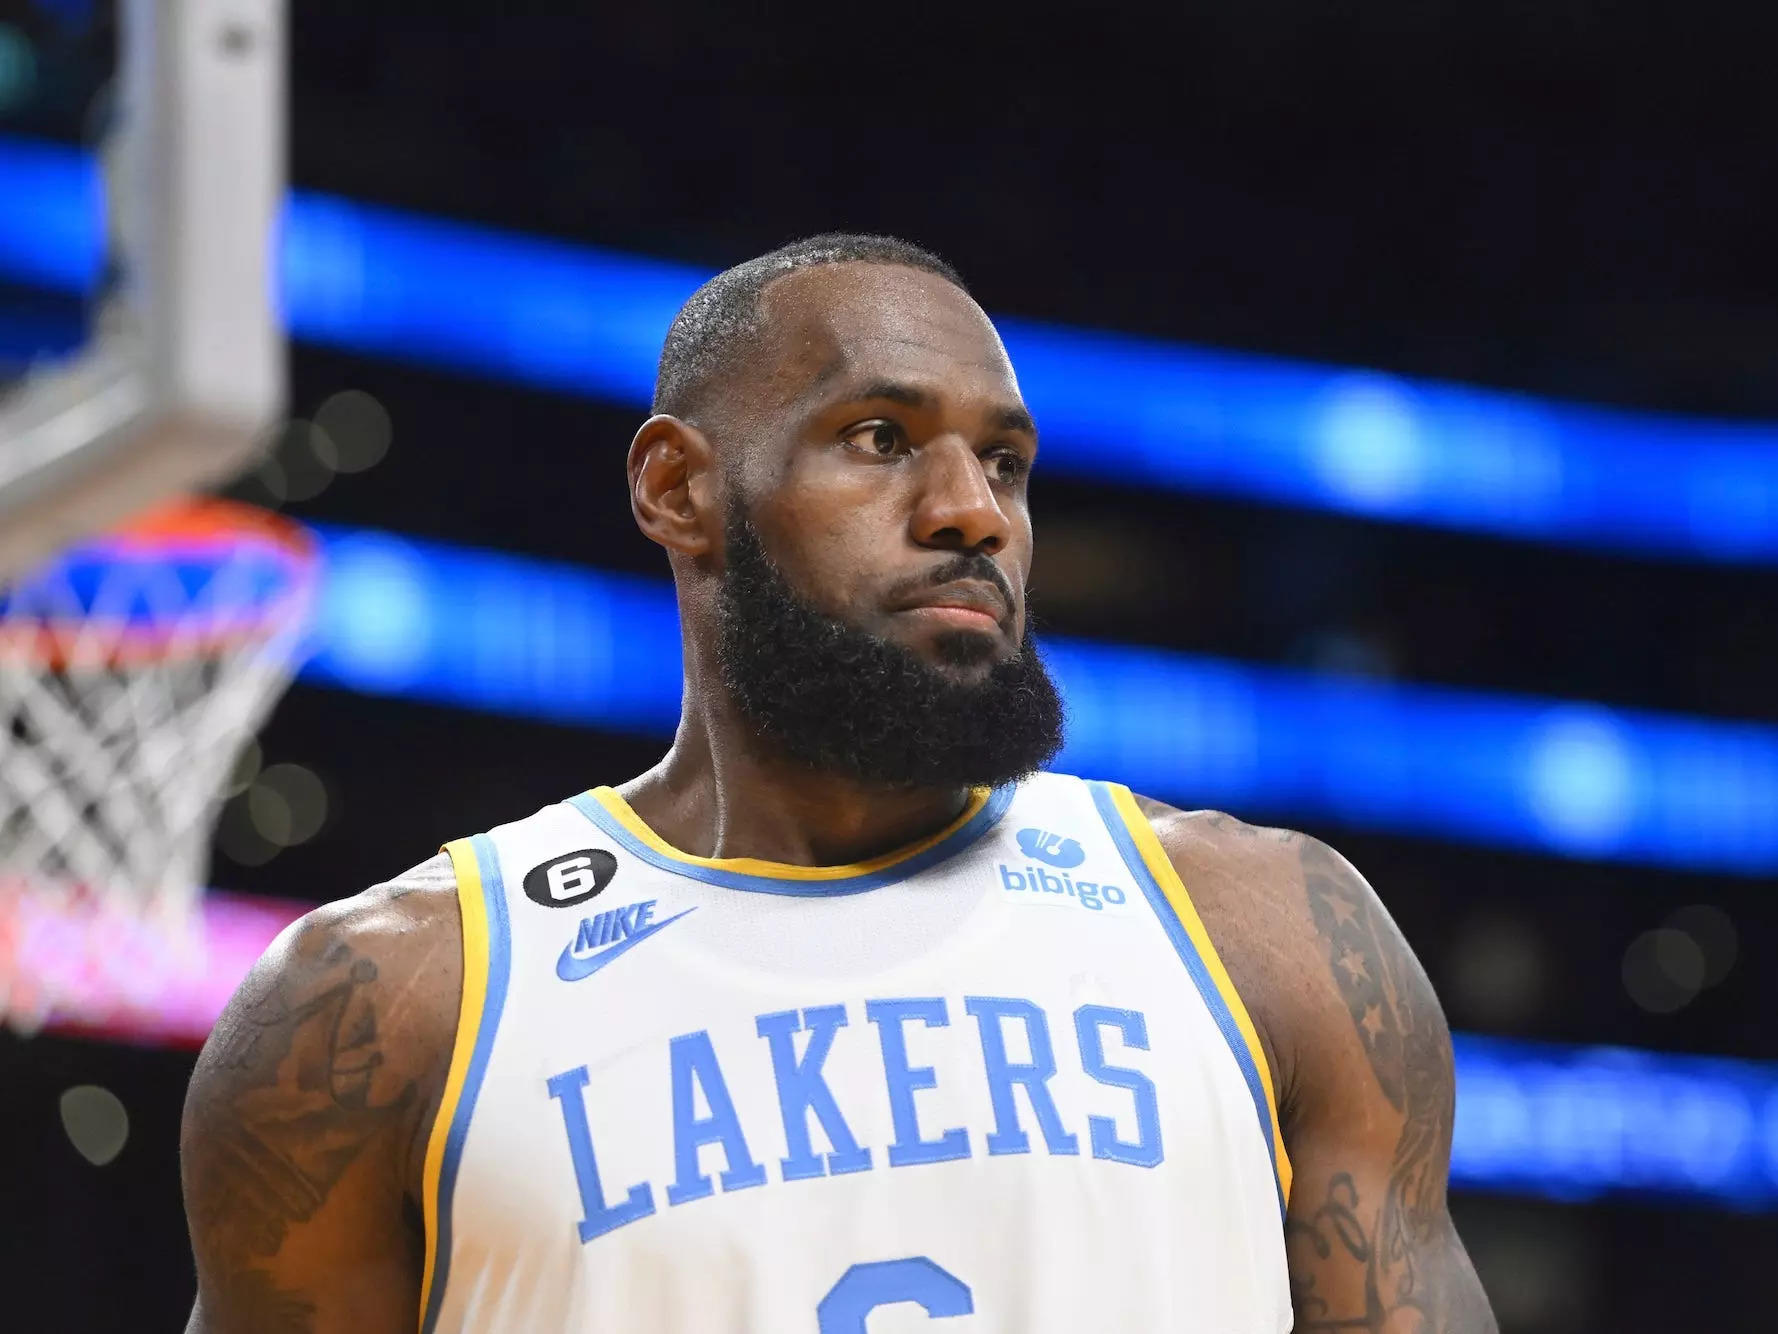 LeBron James caused the Cavaliers' merchandise sales to grow 700